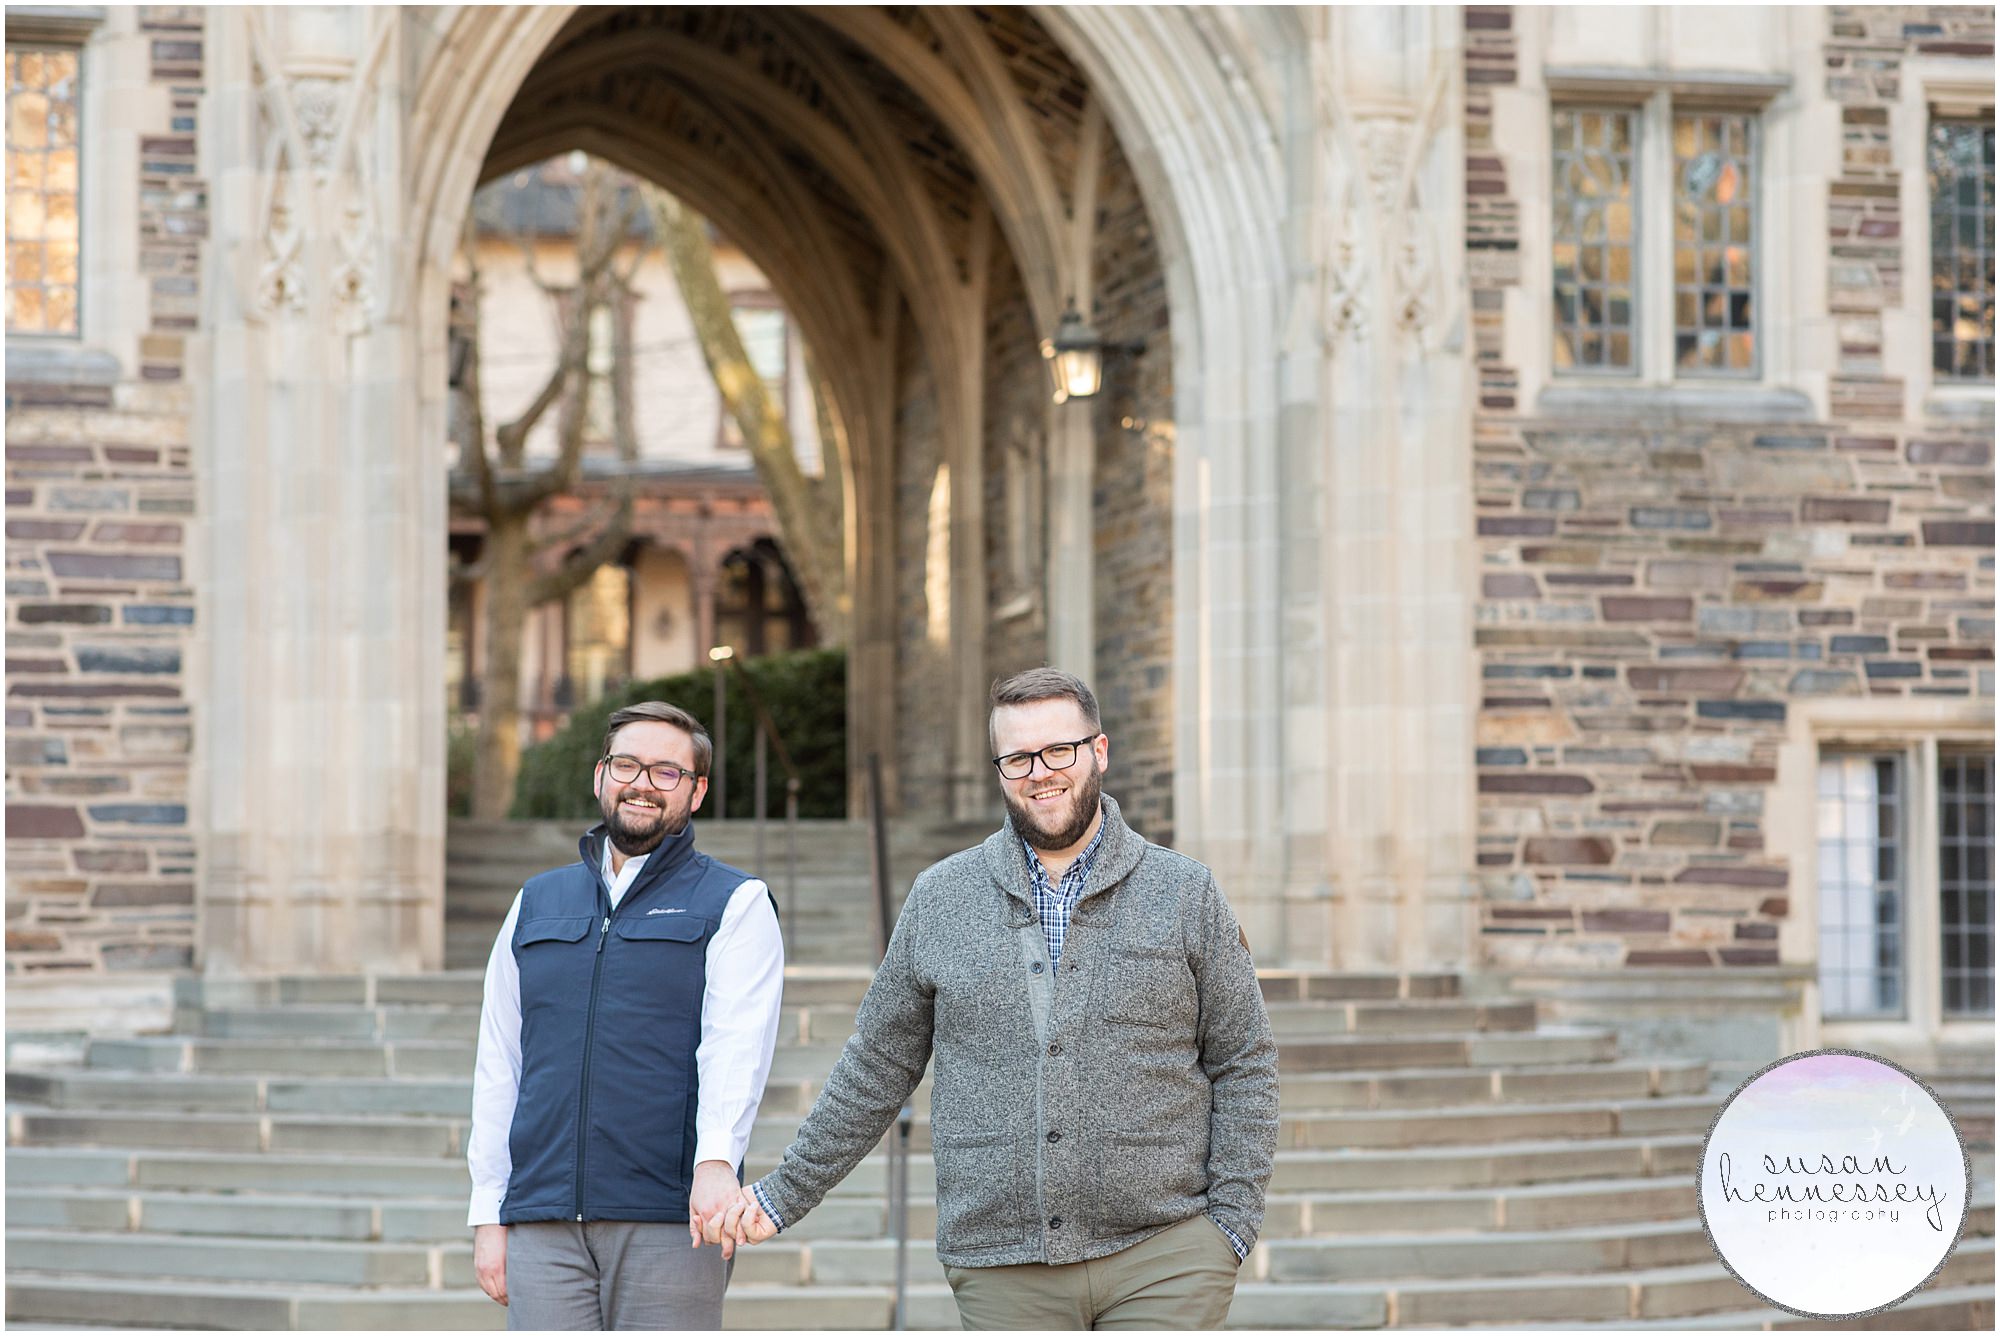 Kelly and Gavin's Engagement Session at Princeton University